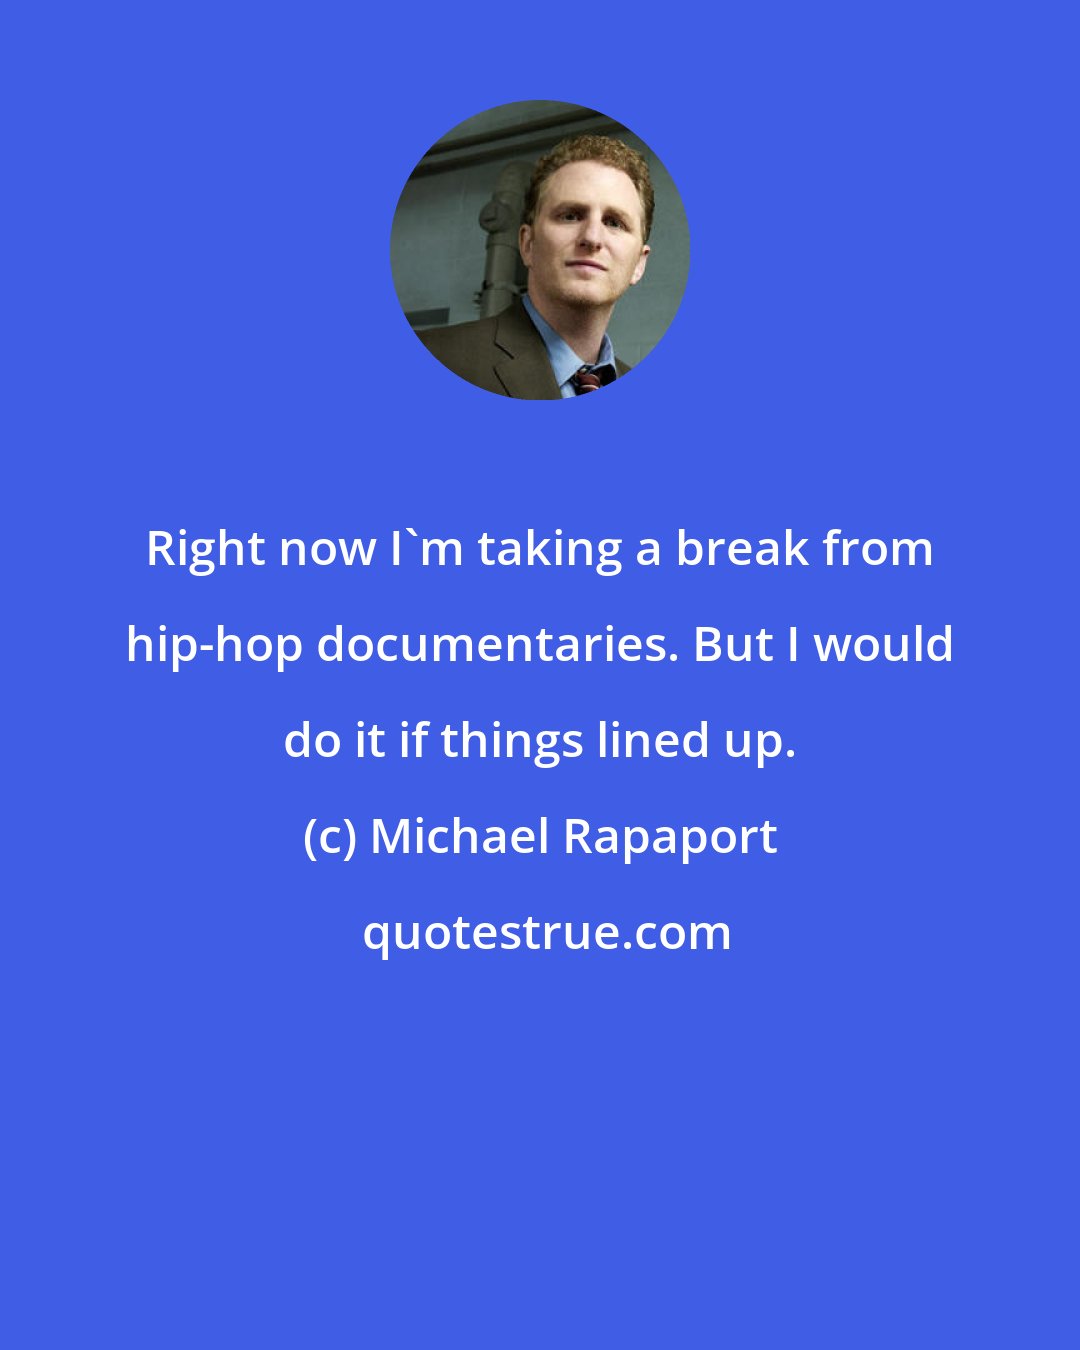 Michael Rapaport: Right now I'm taking a break from hip-hop documentaries. But I would do it if things lined up.